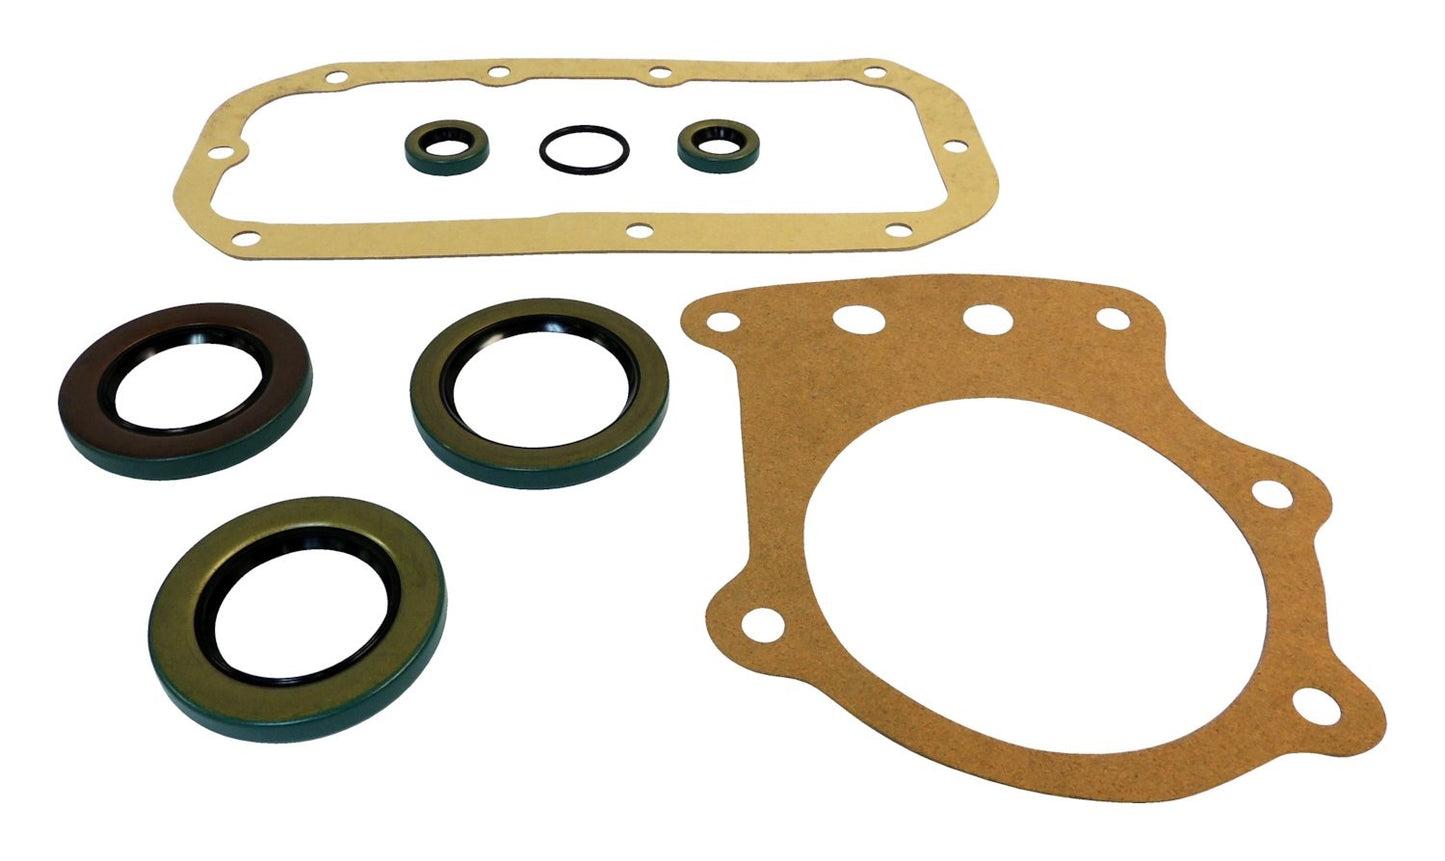 CrownVintage Jeep Transfer Case Gasket and Seal Kit - Multi Colors